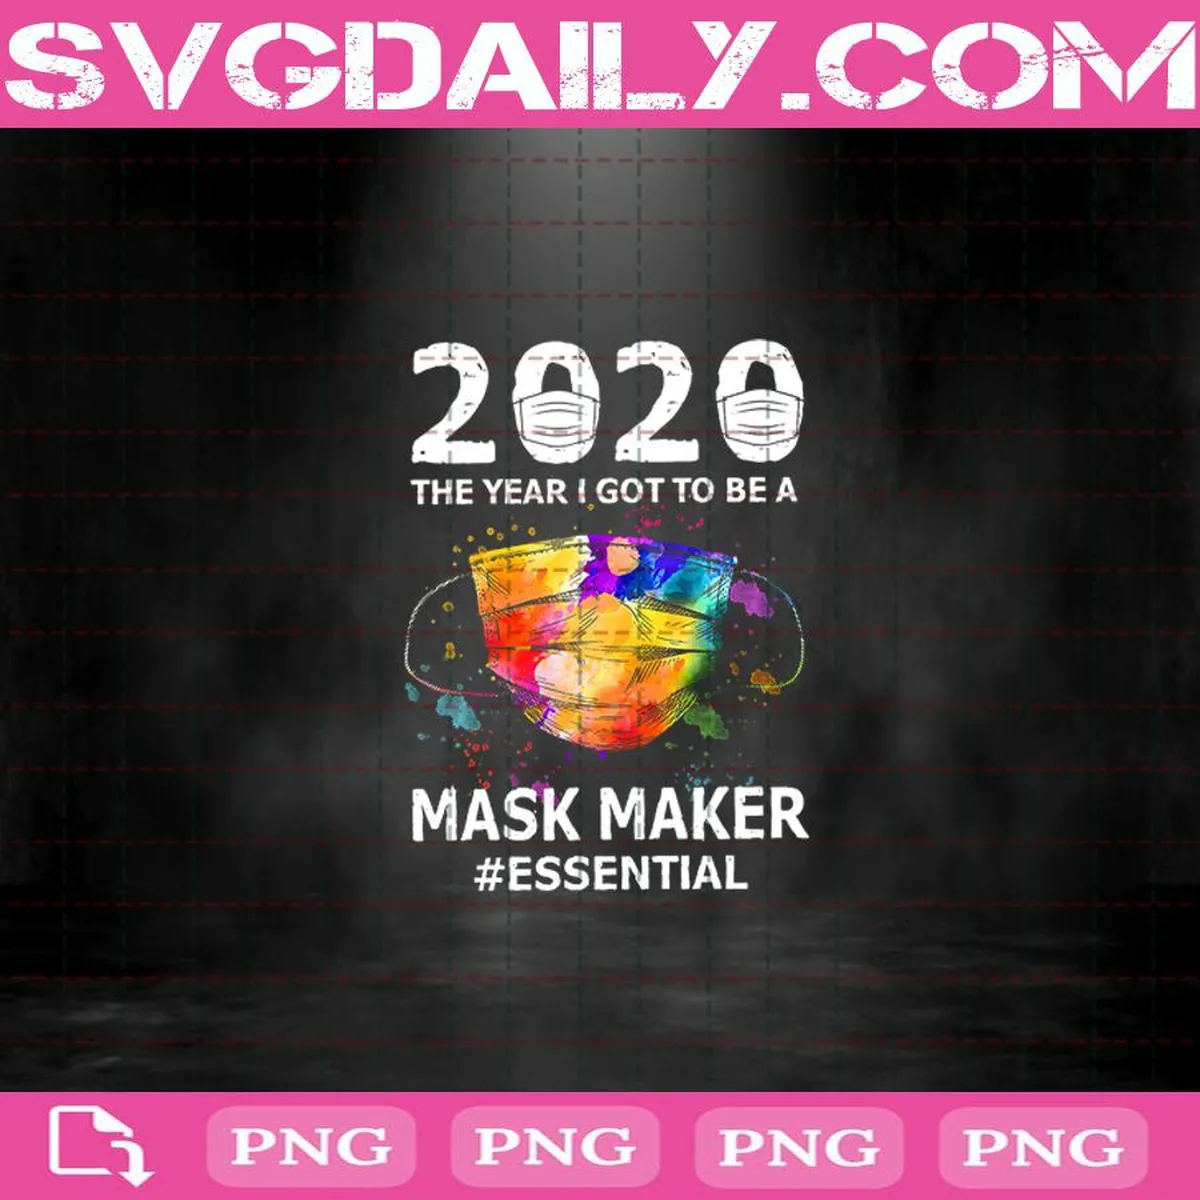 Official 2020 The Year I Got To Be A Mask Maker Essential Png, Mask Maker Png, Face Mask Png